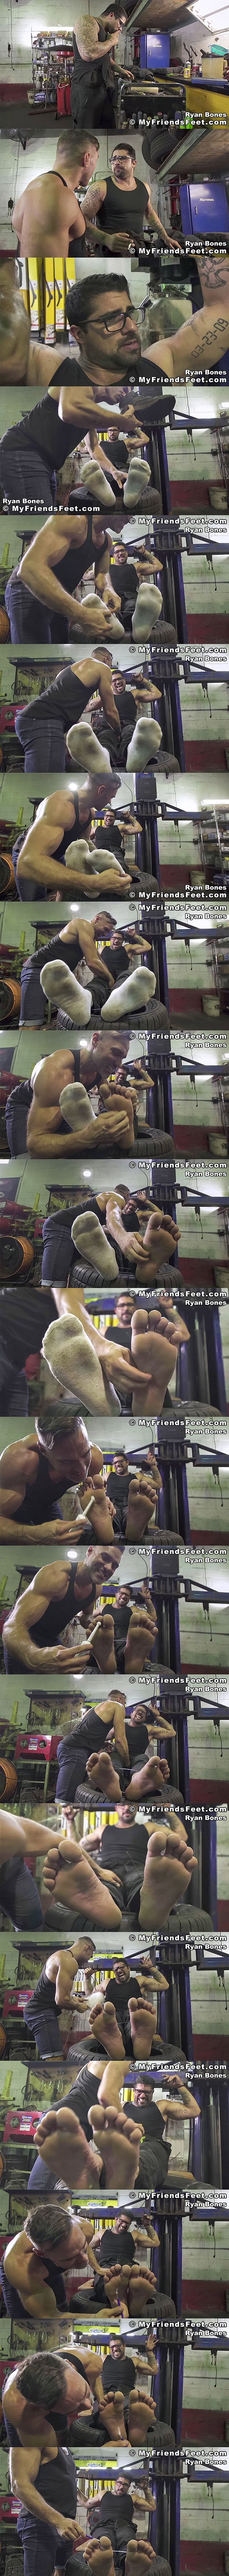 Myfriendsfeet - Canadian straight beefcake, masculine mechanic Ryan Bones (aka Alex Duca or Giuliano) gets his sensitive thighs and manly feet tickled by Manuel Skye in the garage 02